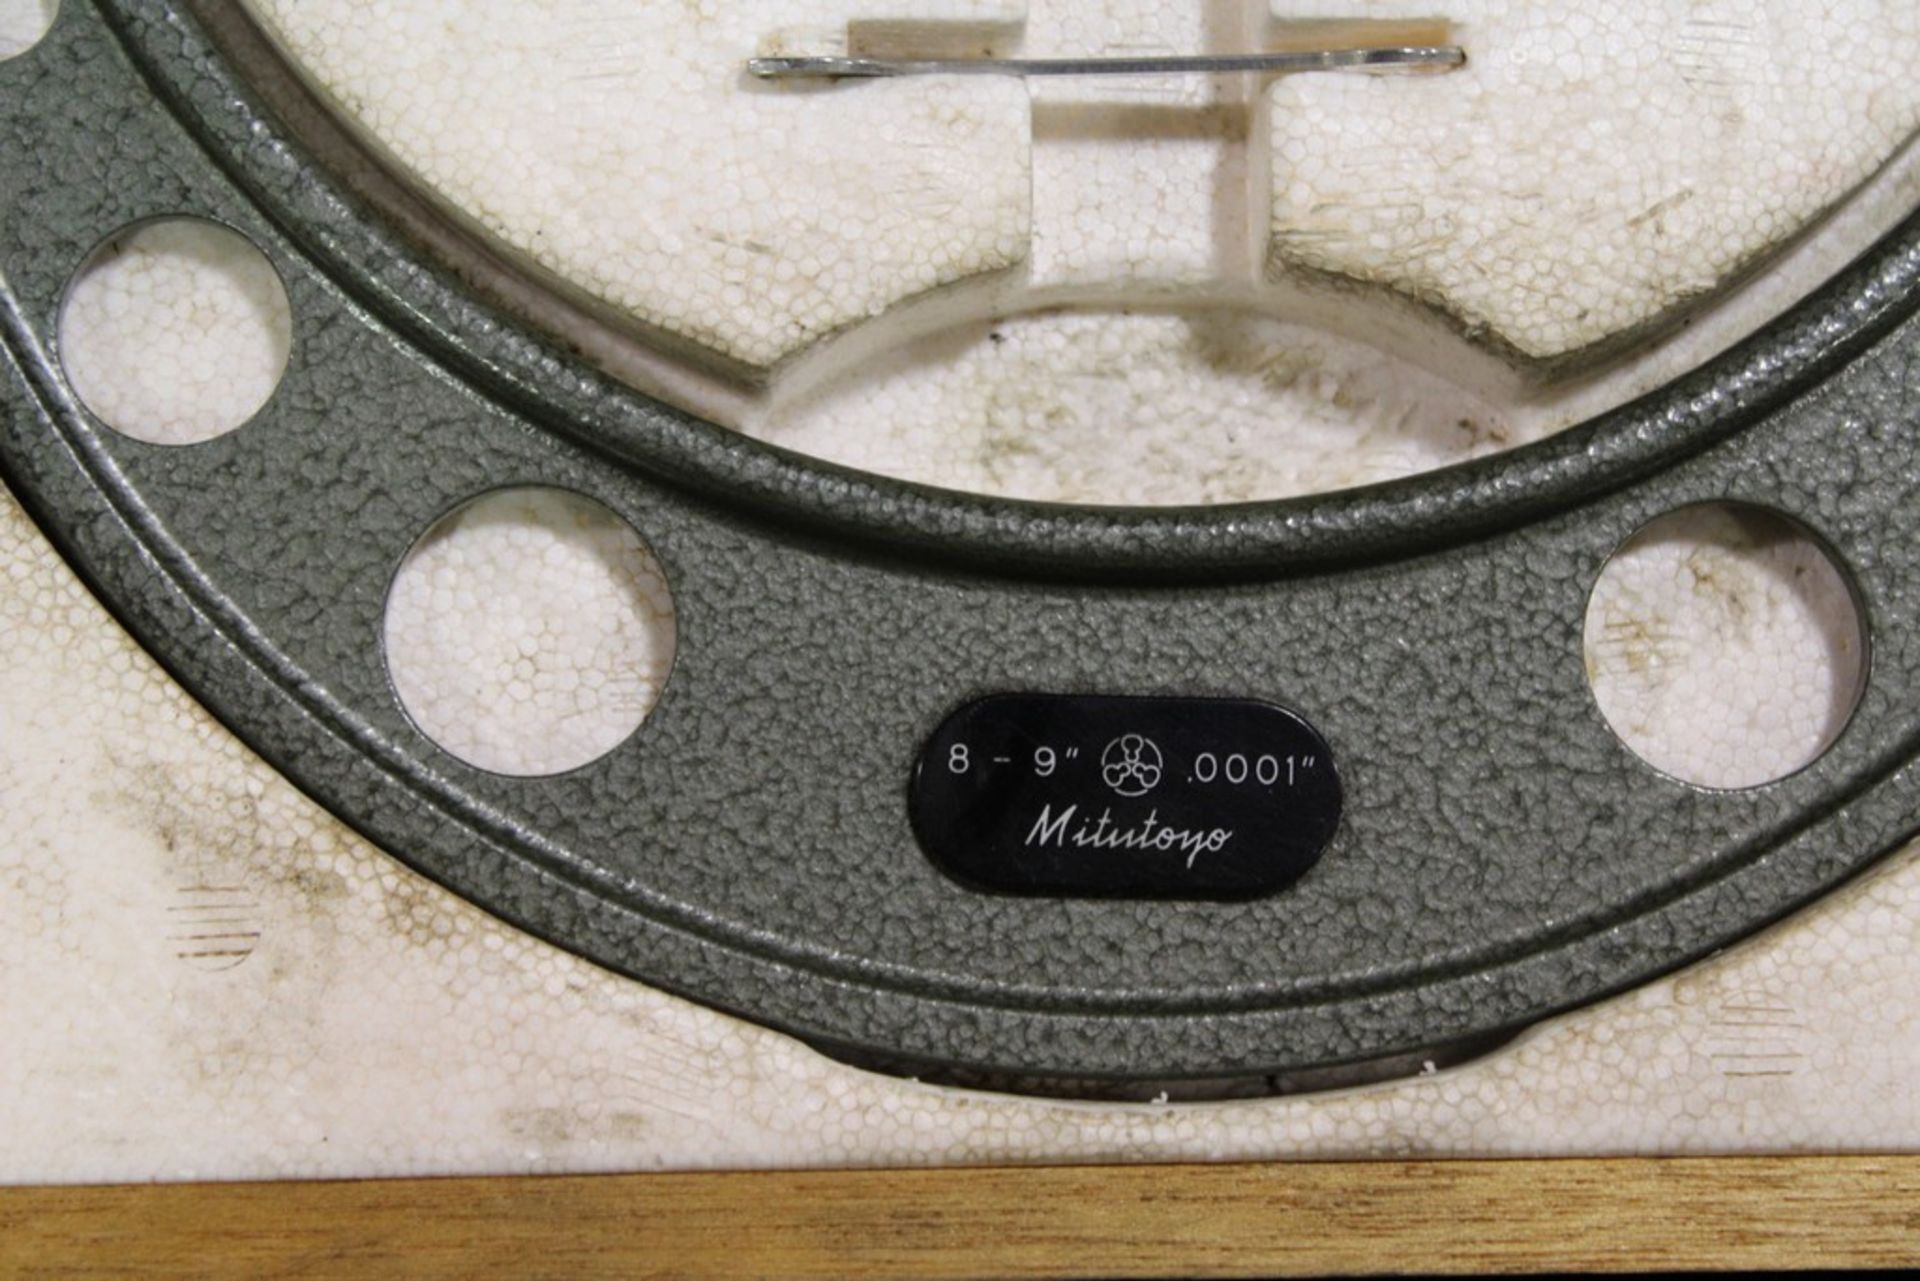 MITUTOYO NO. 103-223A 8" - 9" RATCHETING MICROMETER - Image 2 of 2